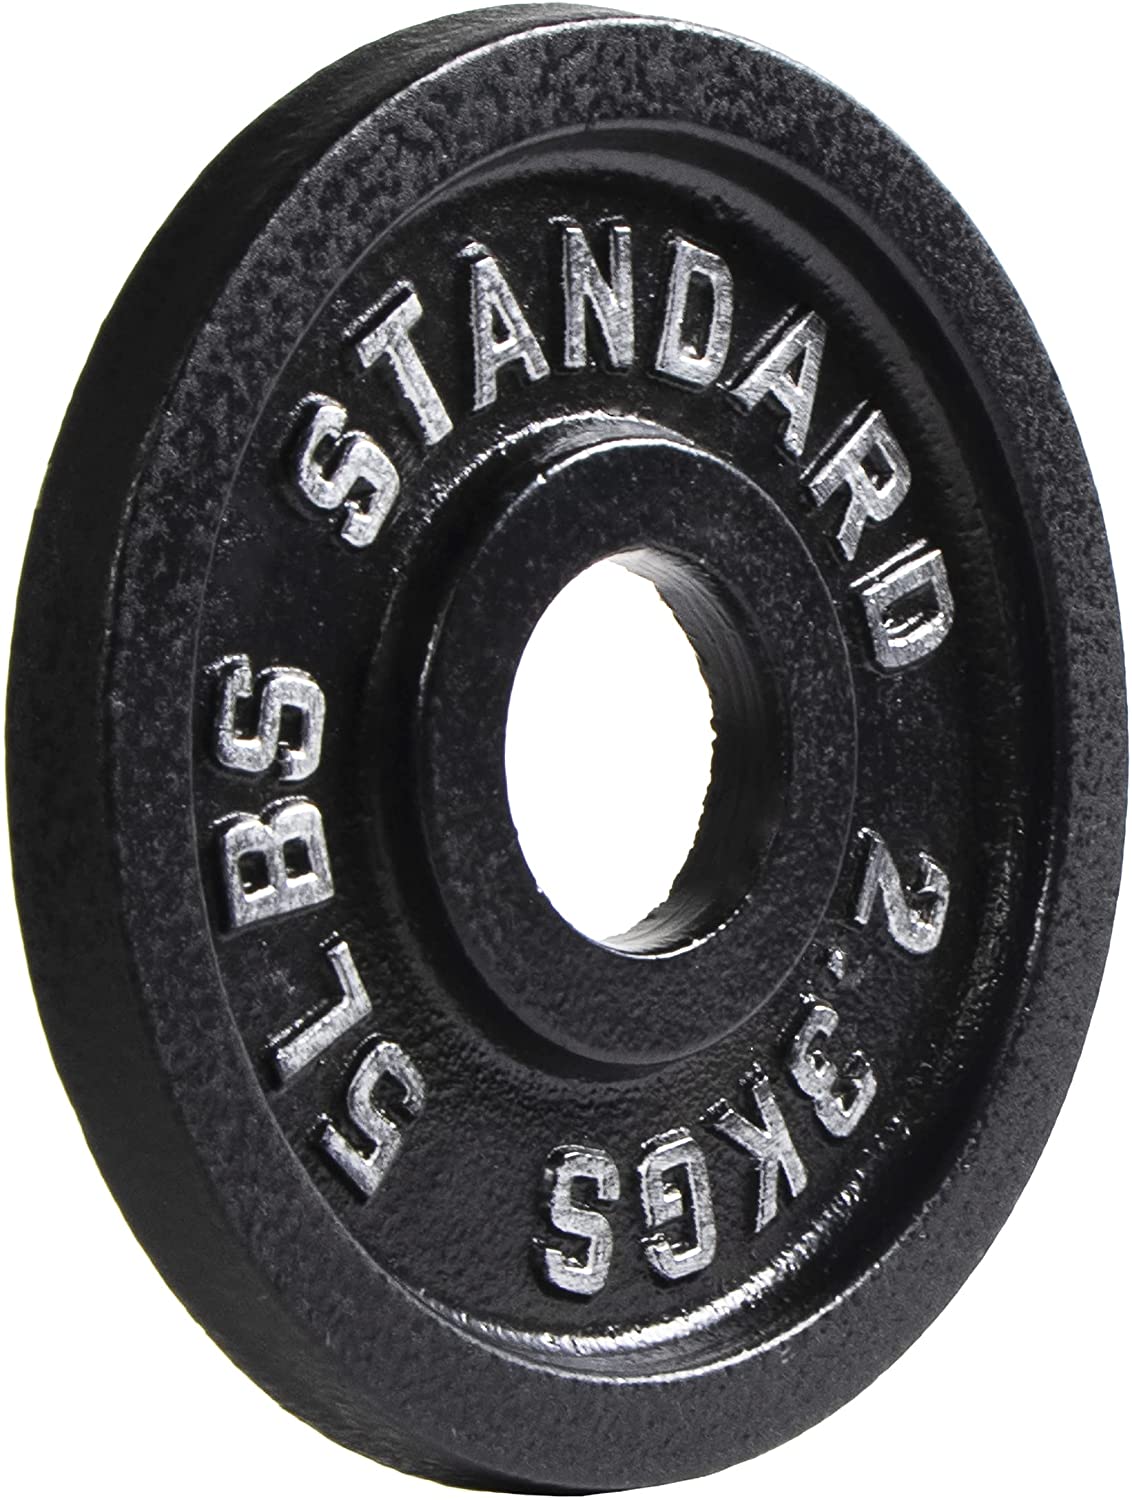 BalanceFrom Classic Cast Iron Weight Plates for Strength Training, 2-Inch, 5-Pound, Set of 4 - image 3 of 3